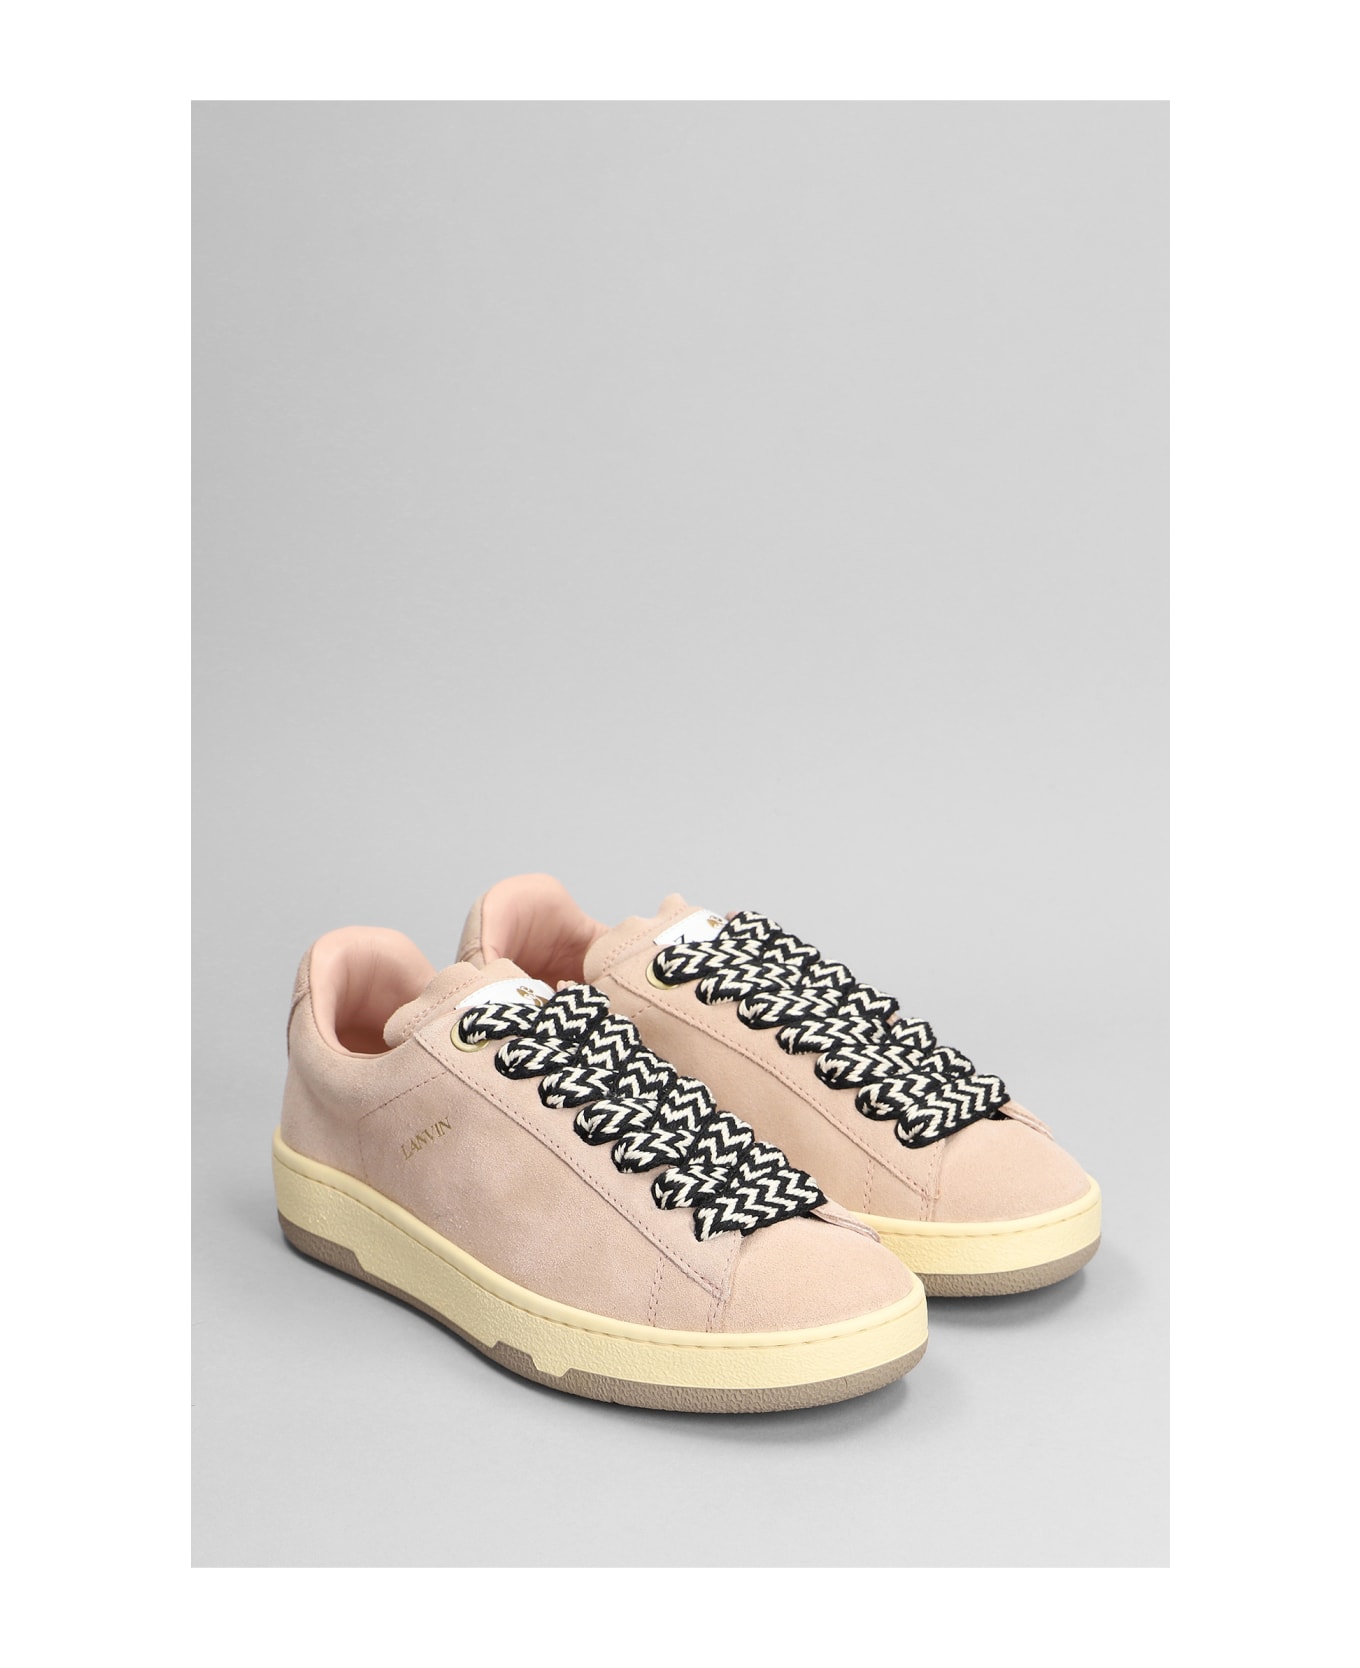 Lanvin Curb Sneakers - Pink スニーカー